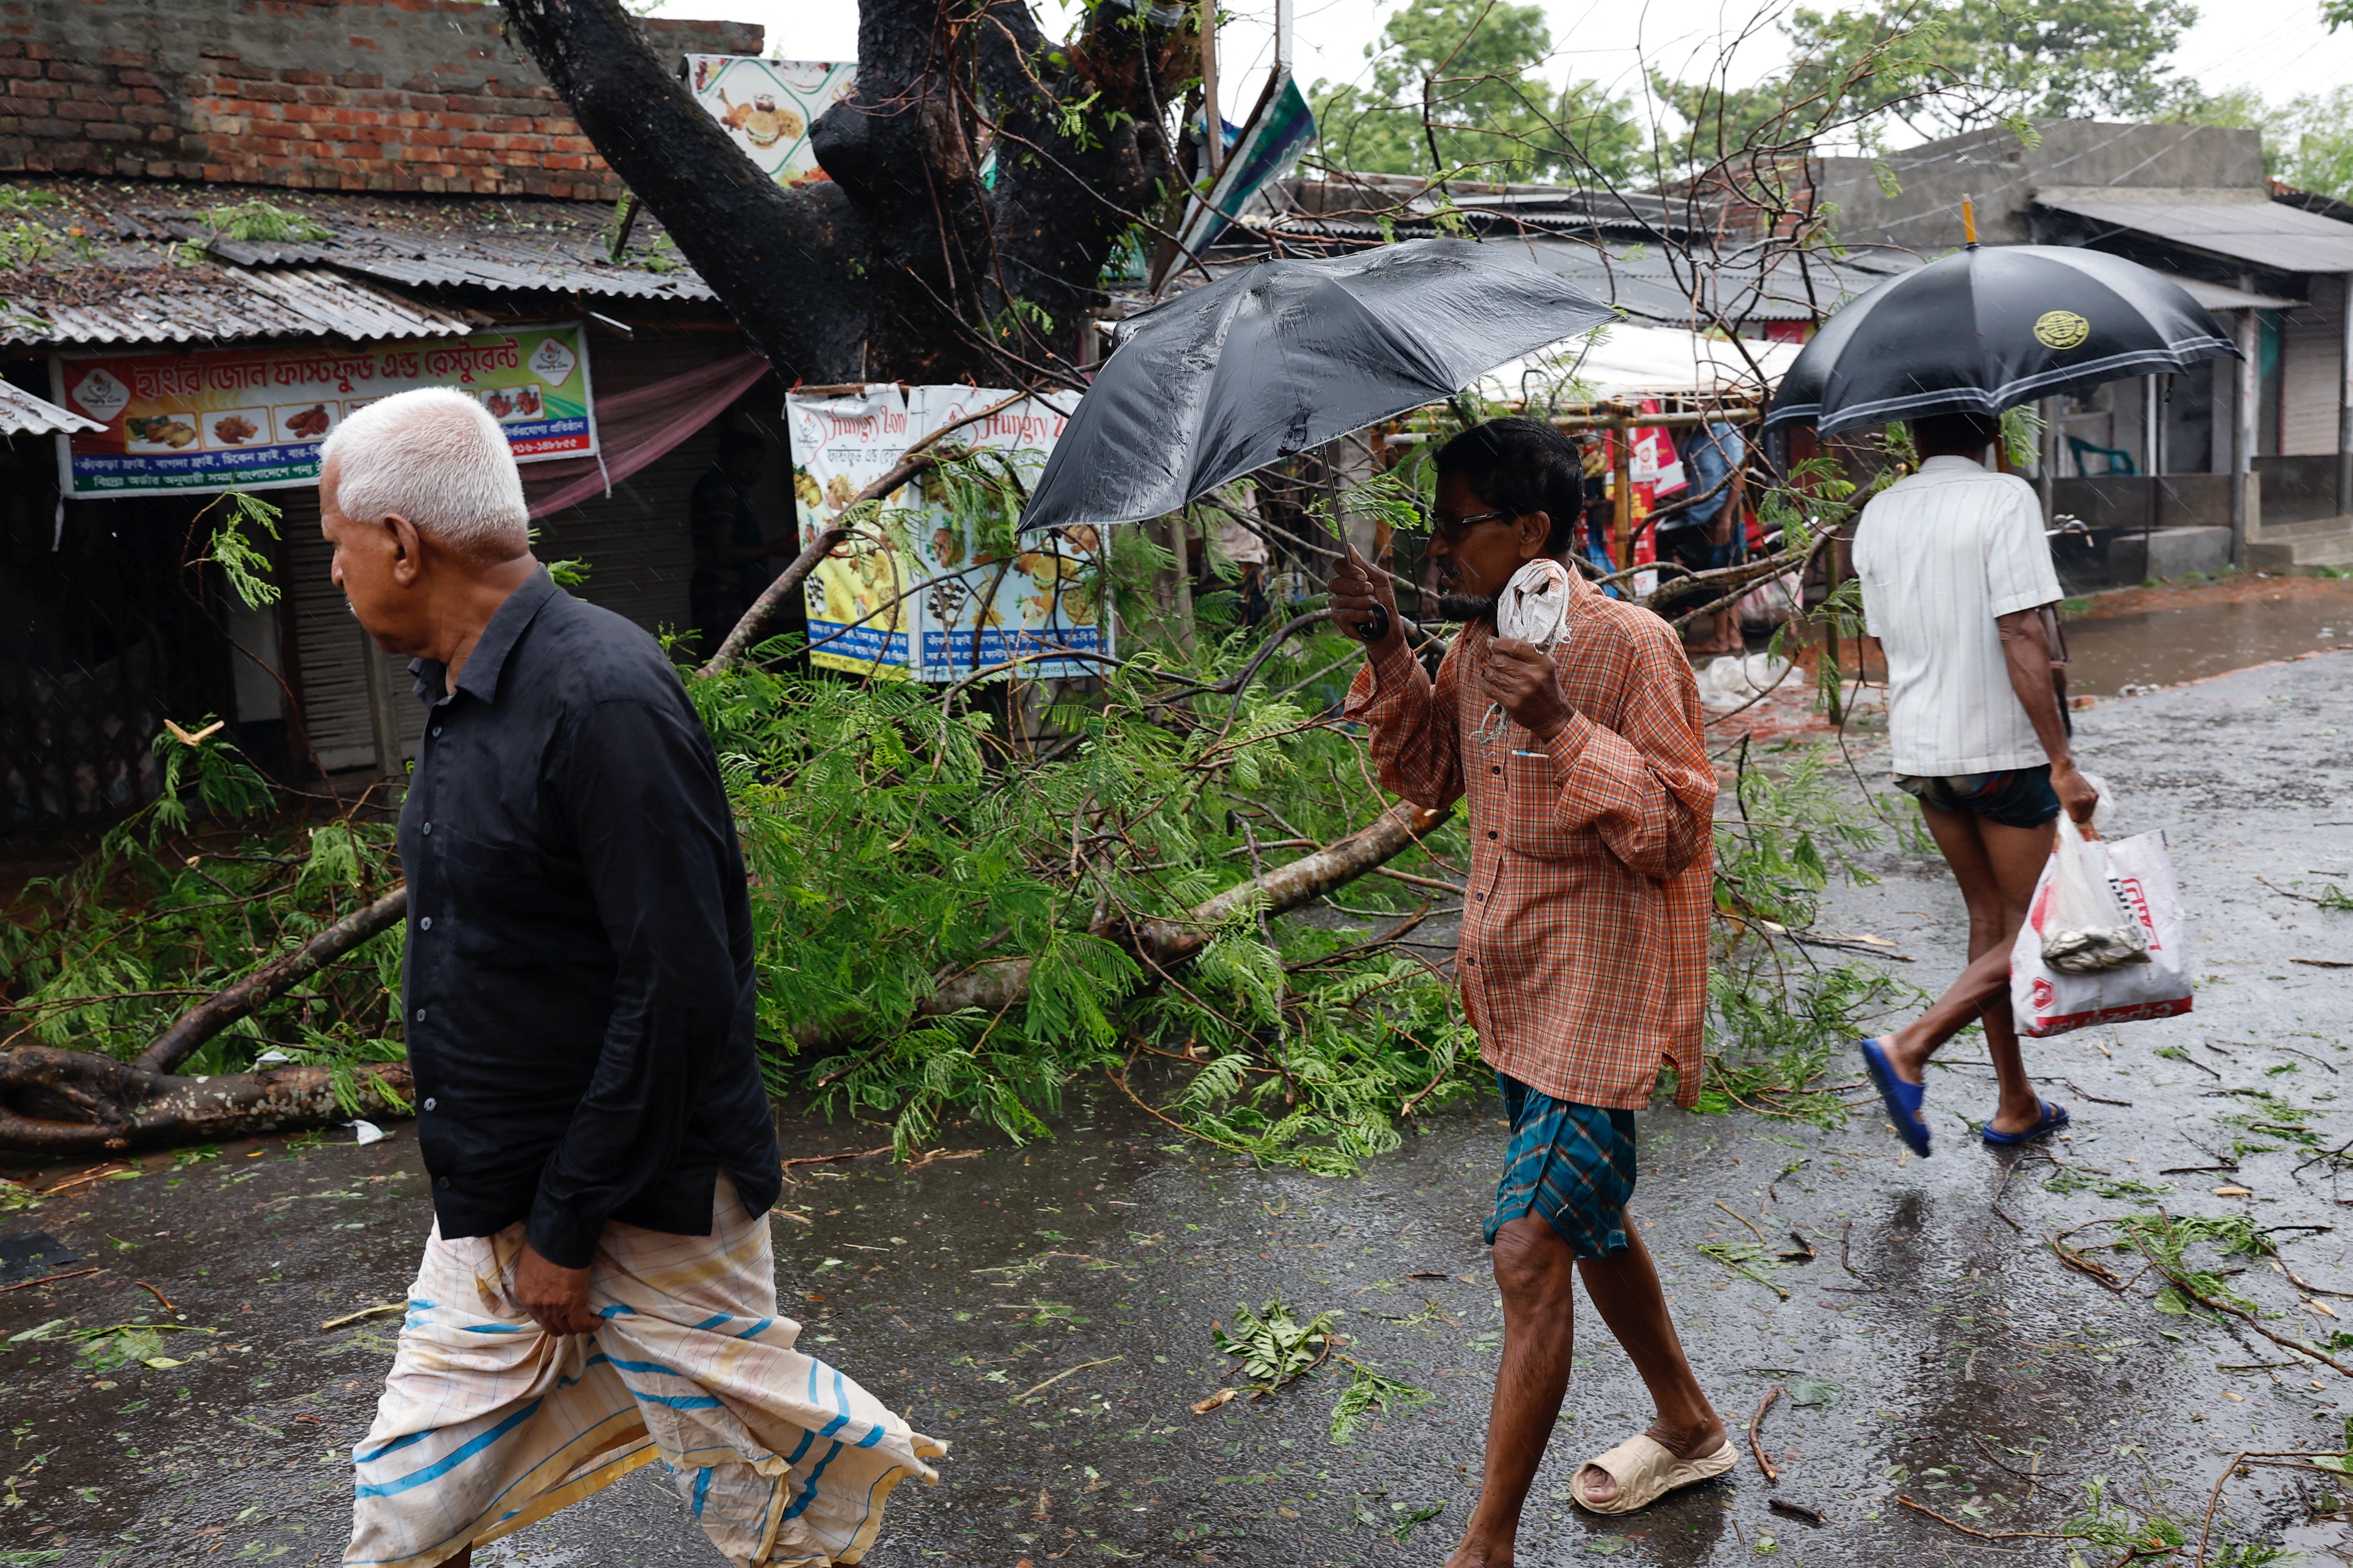 People walk past a fallen tree branch as Cyclone Remal hits the country, in the Shyamnagar area of Satkhira